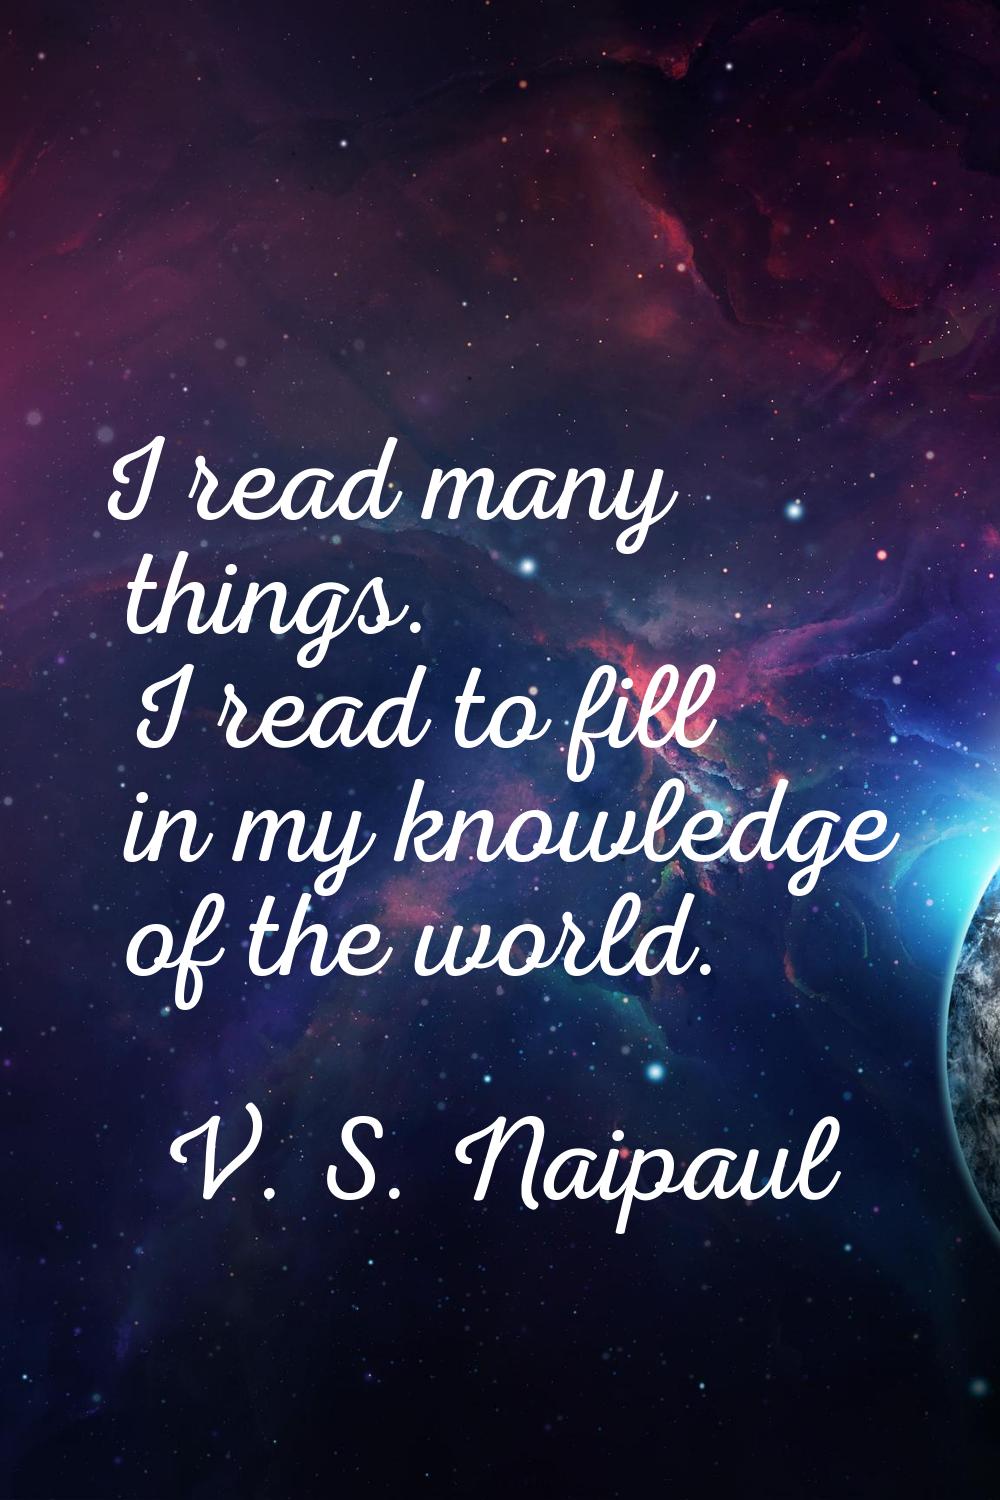 I read many things. I read to fill in my knowledge of the world.